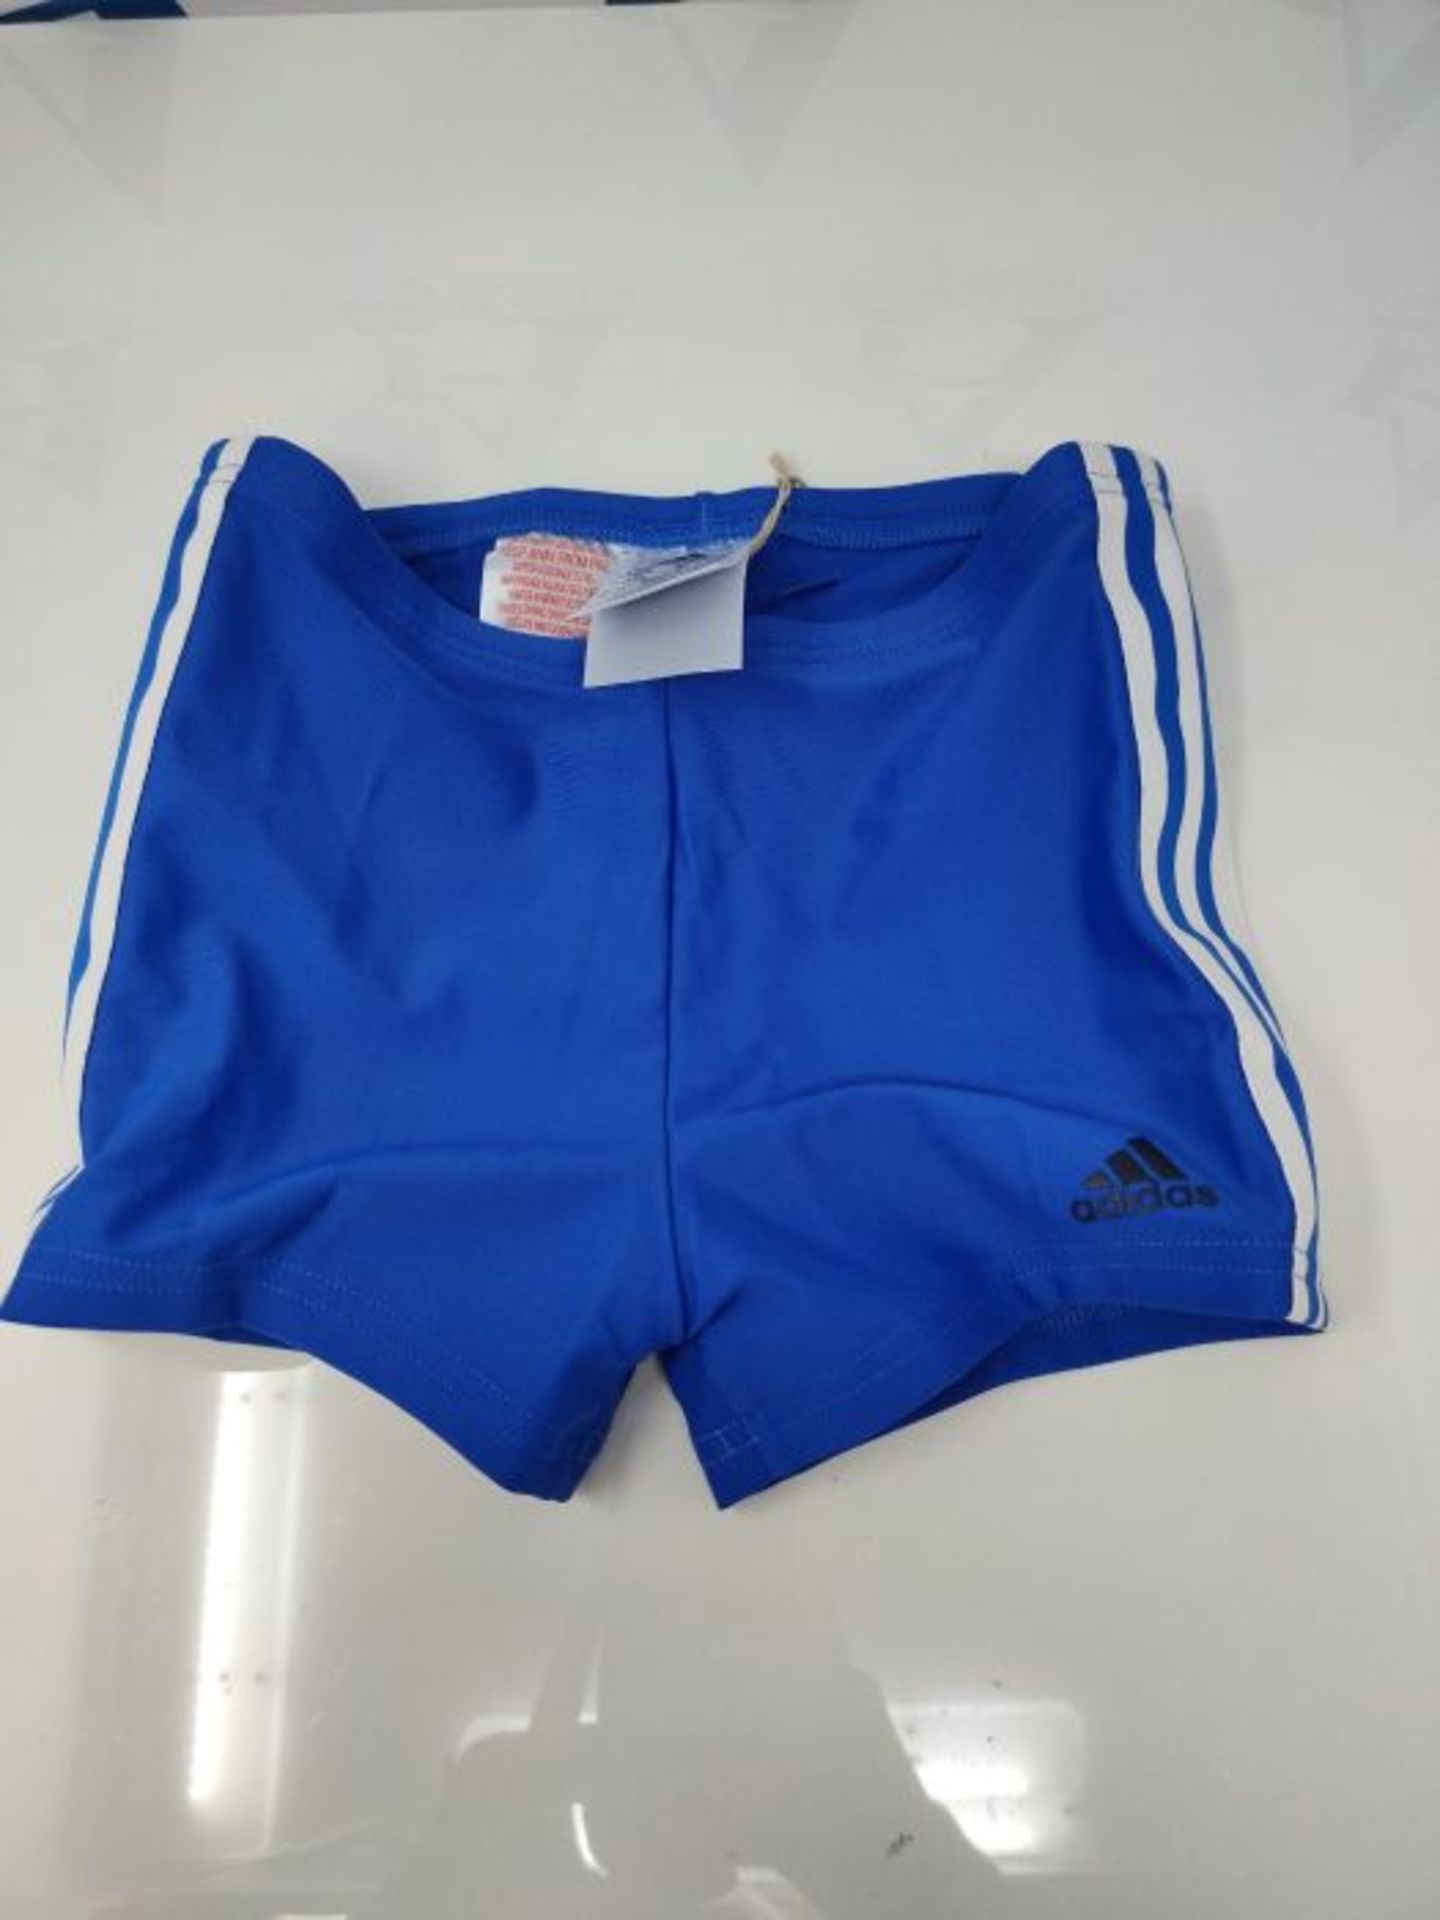 adidas Fit Bx 3S Y Swimsuit - Team Royal Blue/White, 910Y - Image 2 of 2